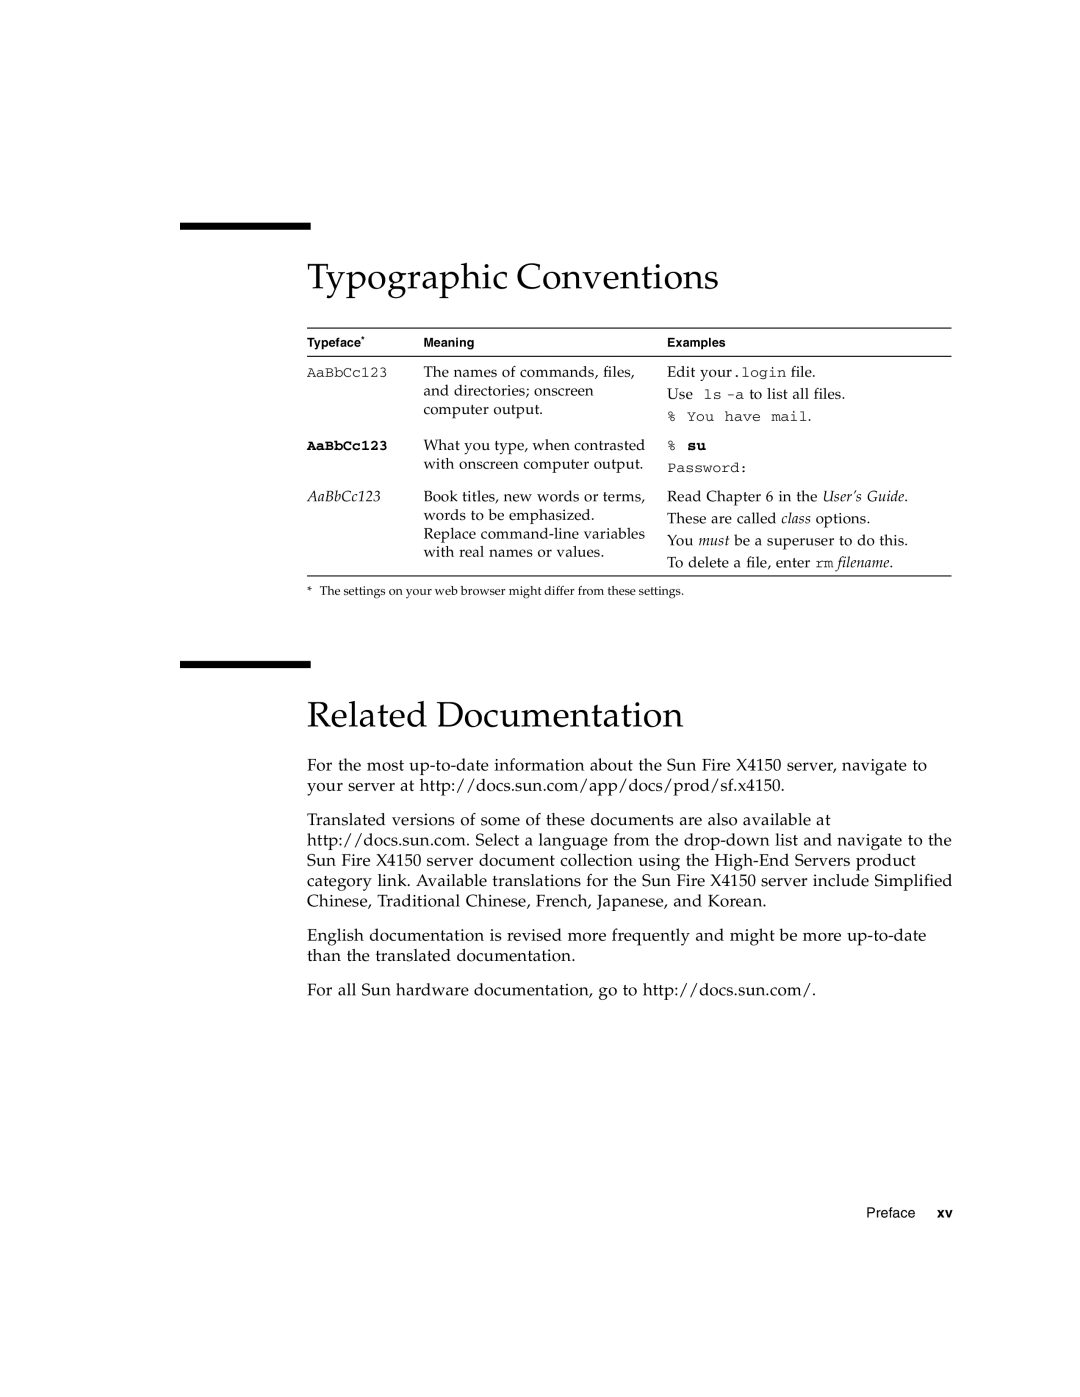 Sun Microsystems X4150 manual Typographic Conventions, Related Documentation 